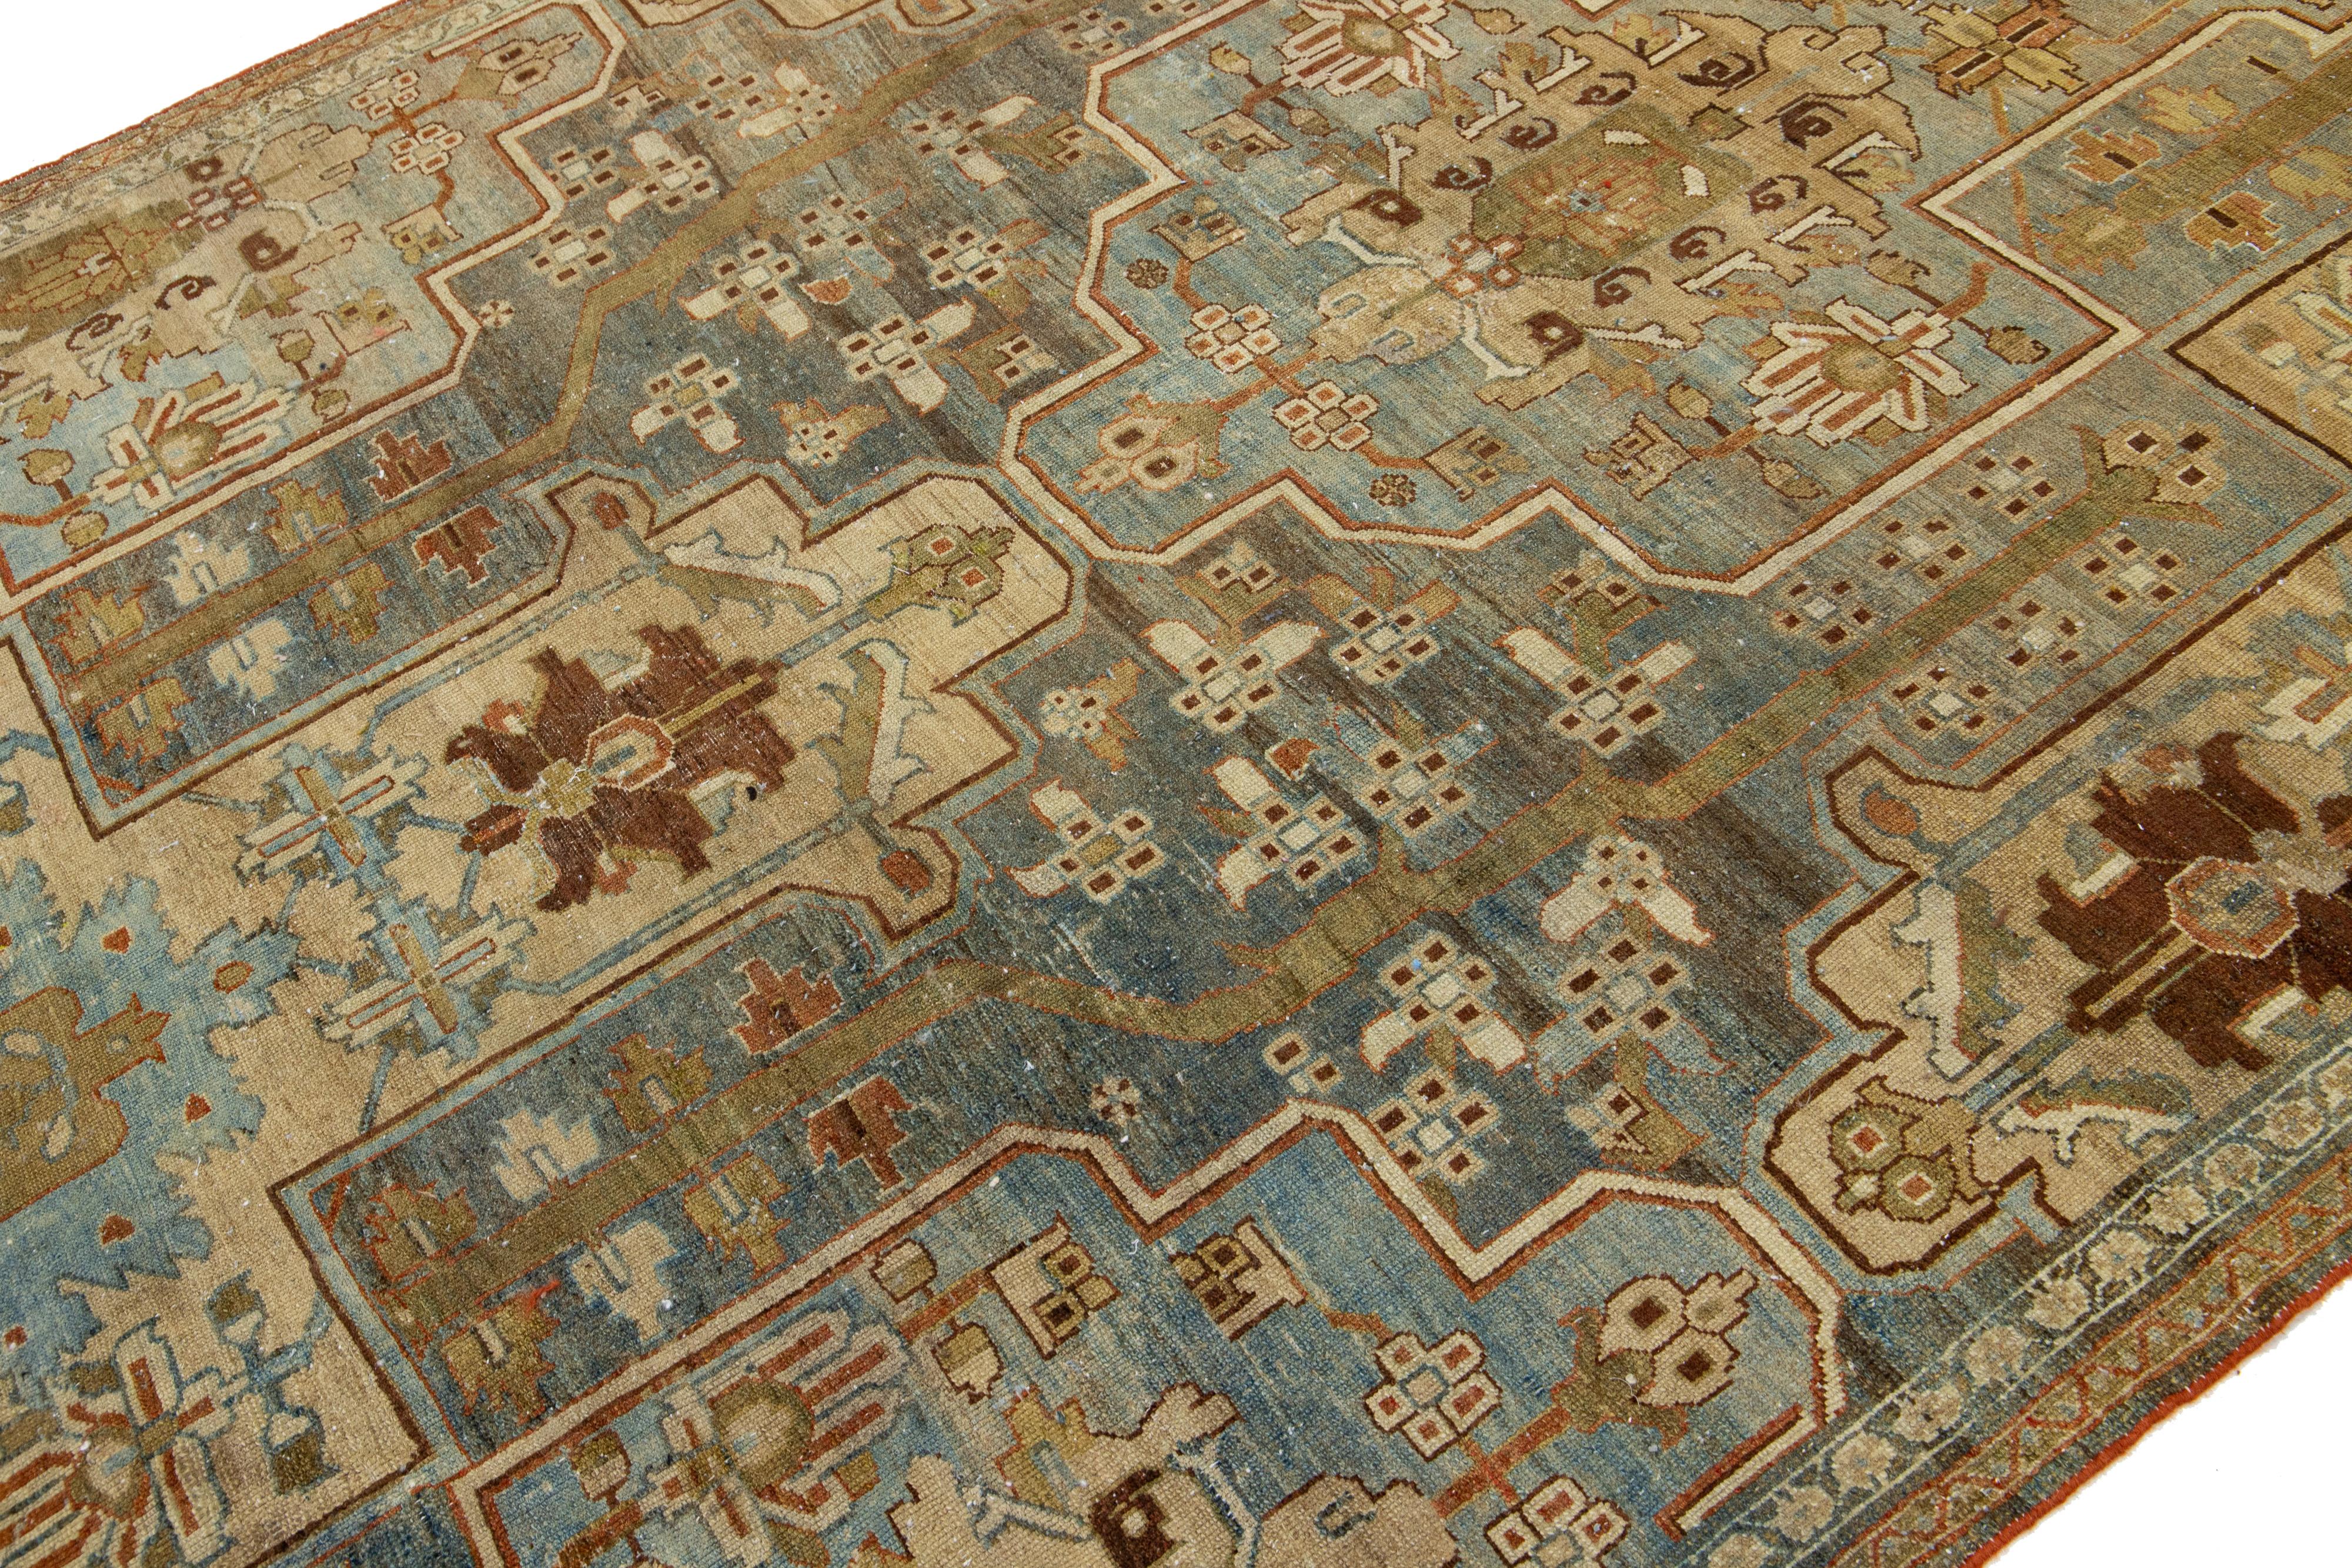 Allover Handmade Antique Persian Malayer Wool Rug From the 1920s In Blue In Excellent Condition For Sale In Norwalk, CT